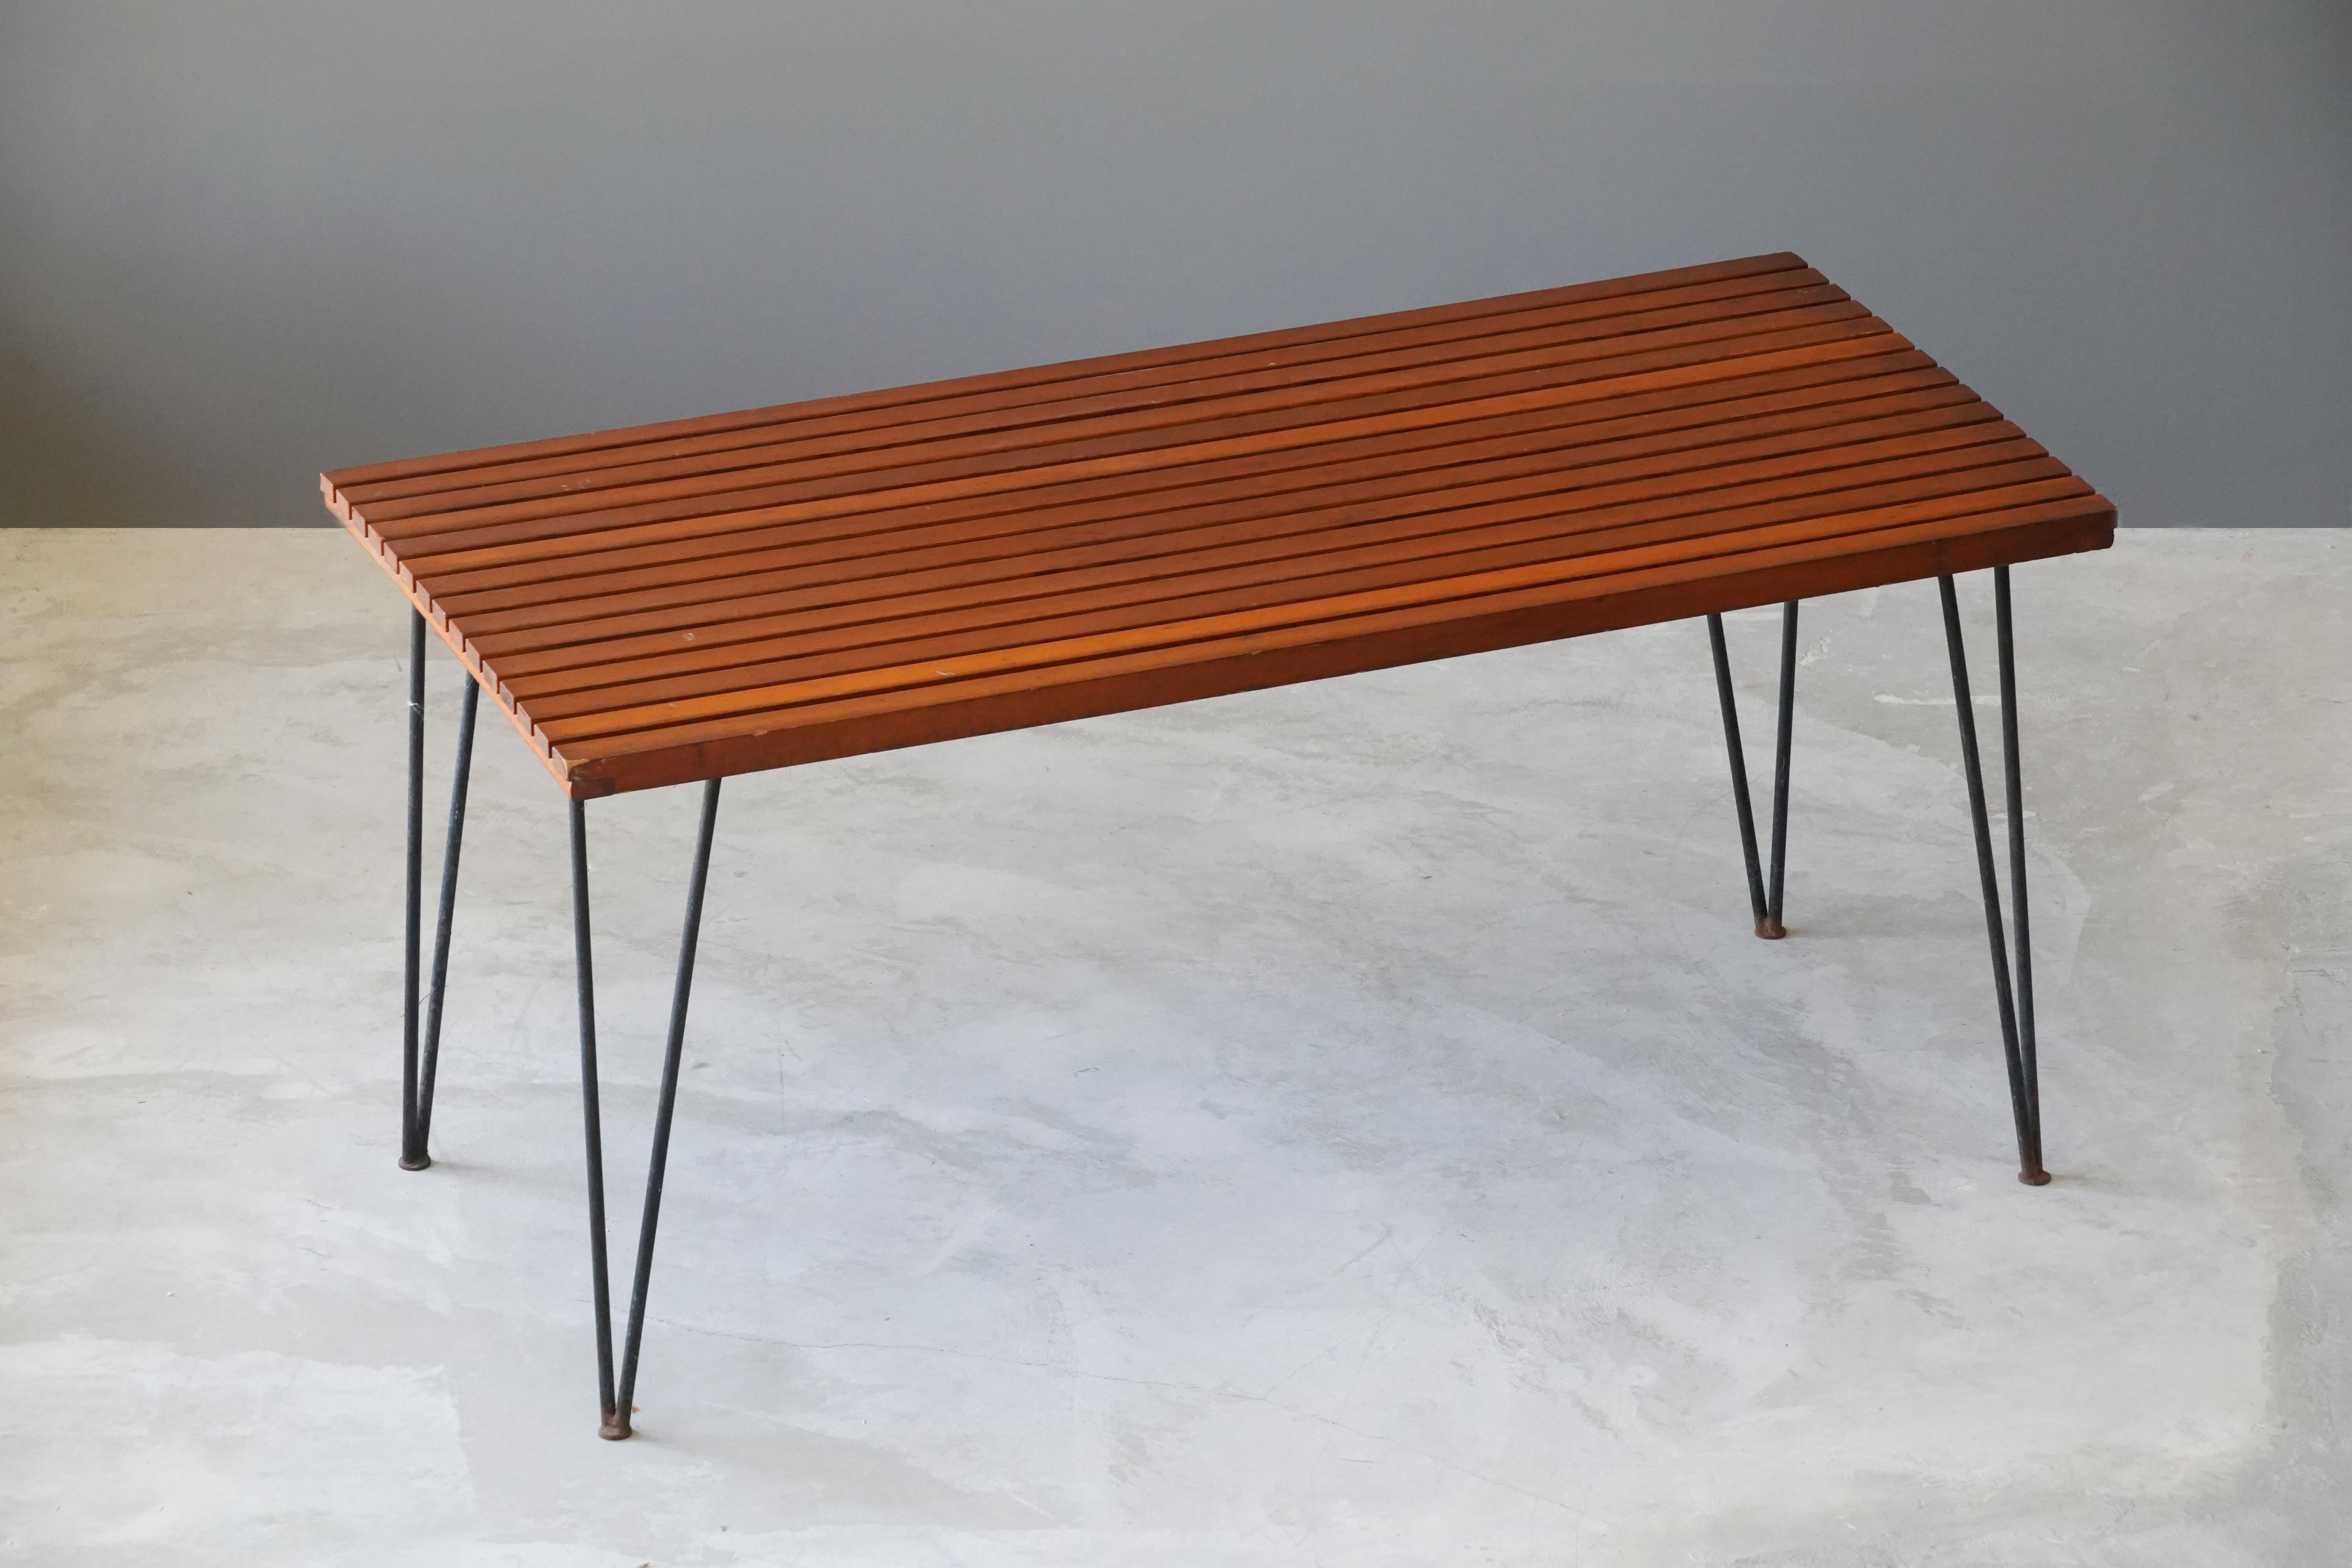 A dining table designed by husband and wife duo Pipsan Saarinen Swanson & J. Robert F. Swanson. Designed by their firm Swanson and Associates as part of the “Sol-Air” line for Ficks Reed Company, Cincinnati in 1949. 

The line was showcased at the